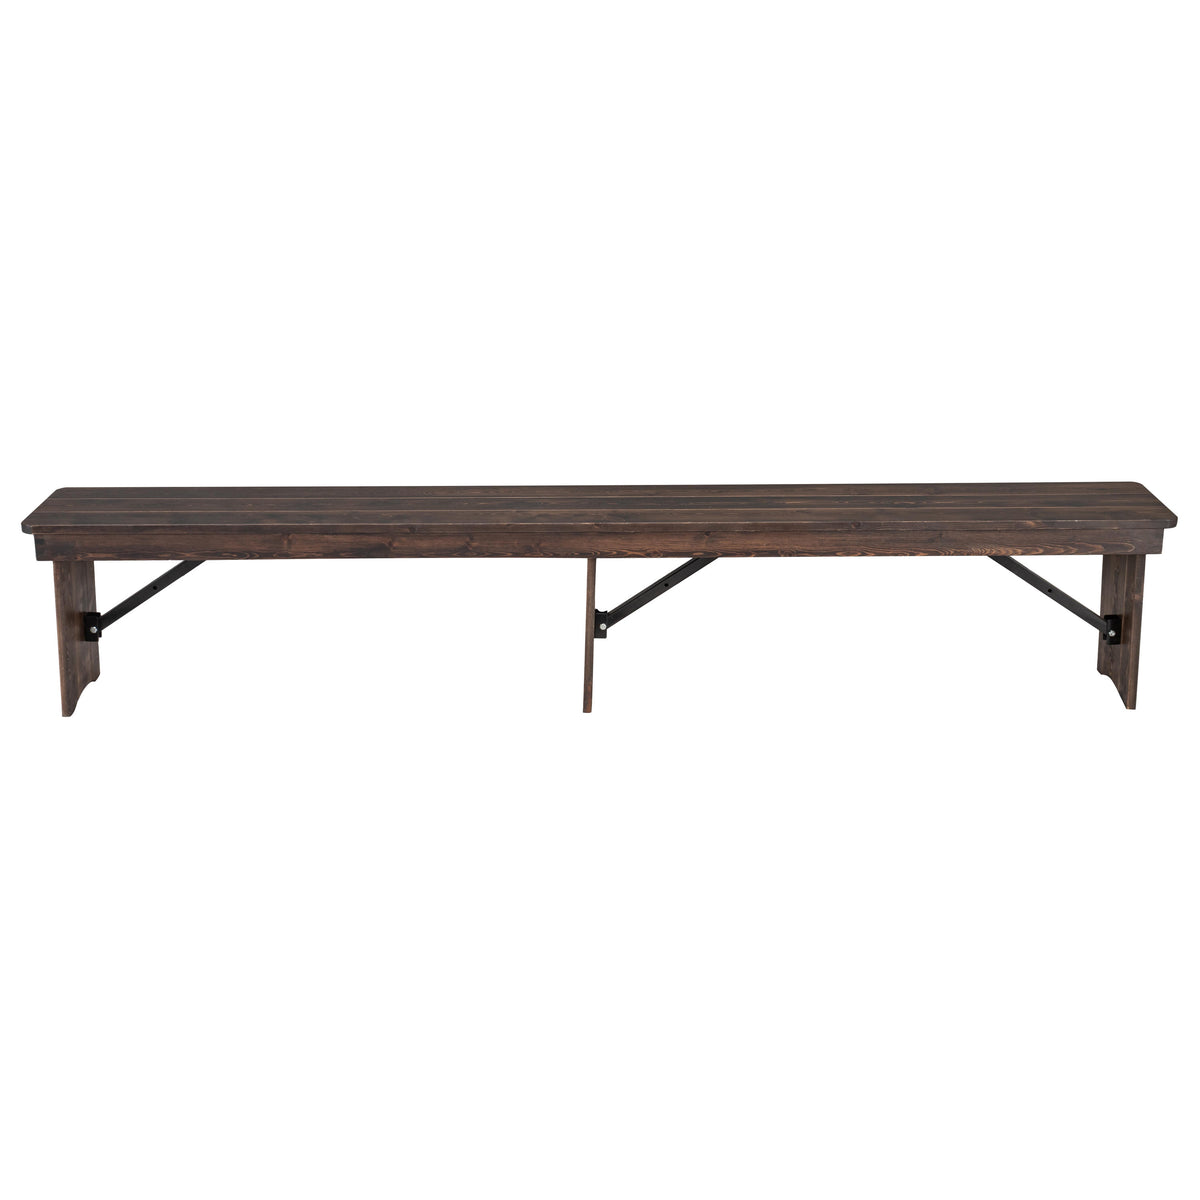 Mahogany |#| 8' x 12inch Solid Pine Folding Farm Bench with 3 Legs in Antique Rustic Mahogany